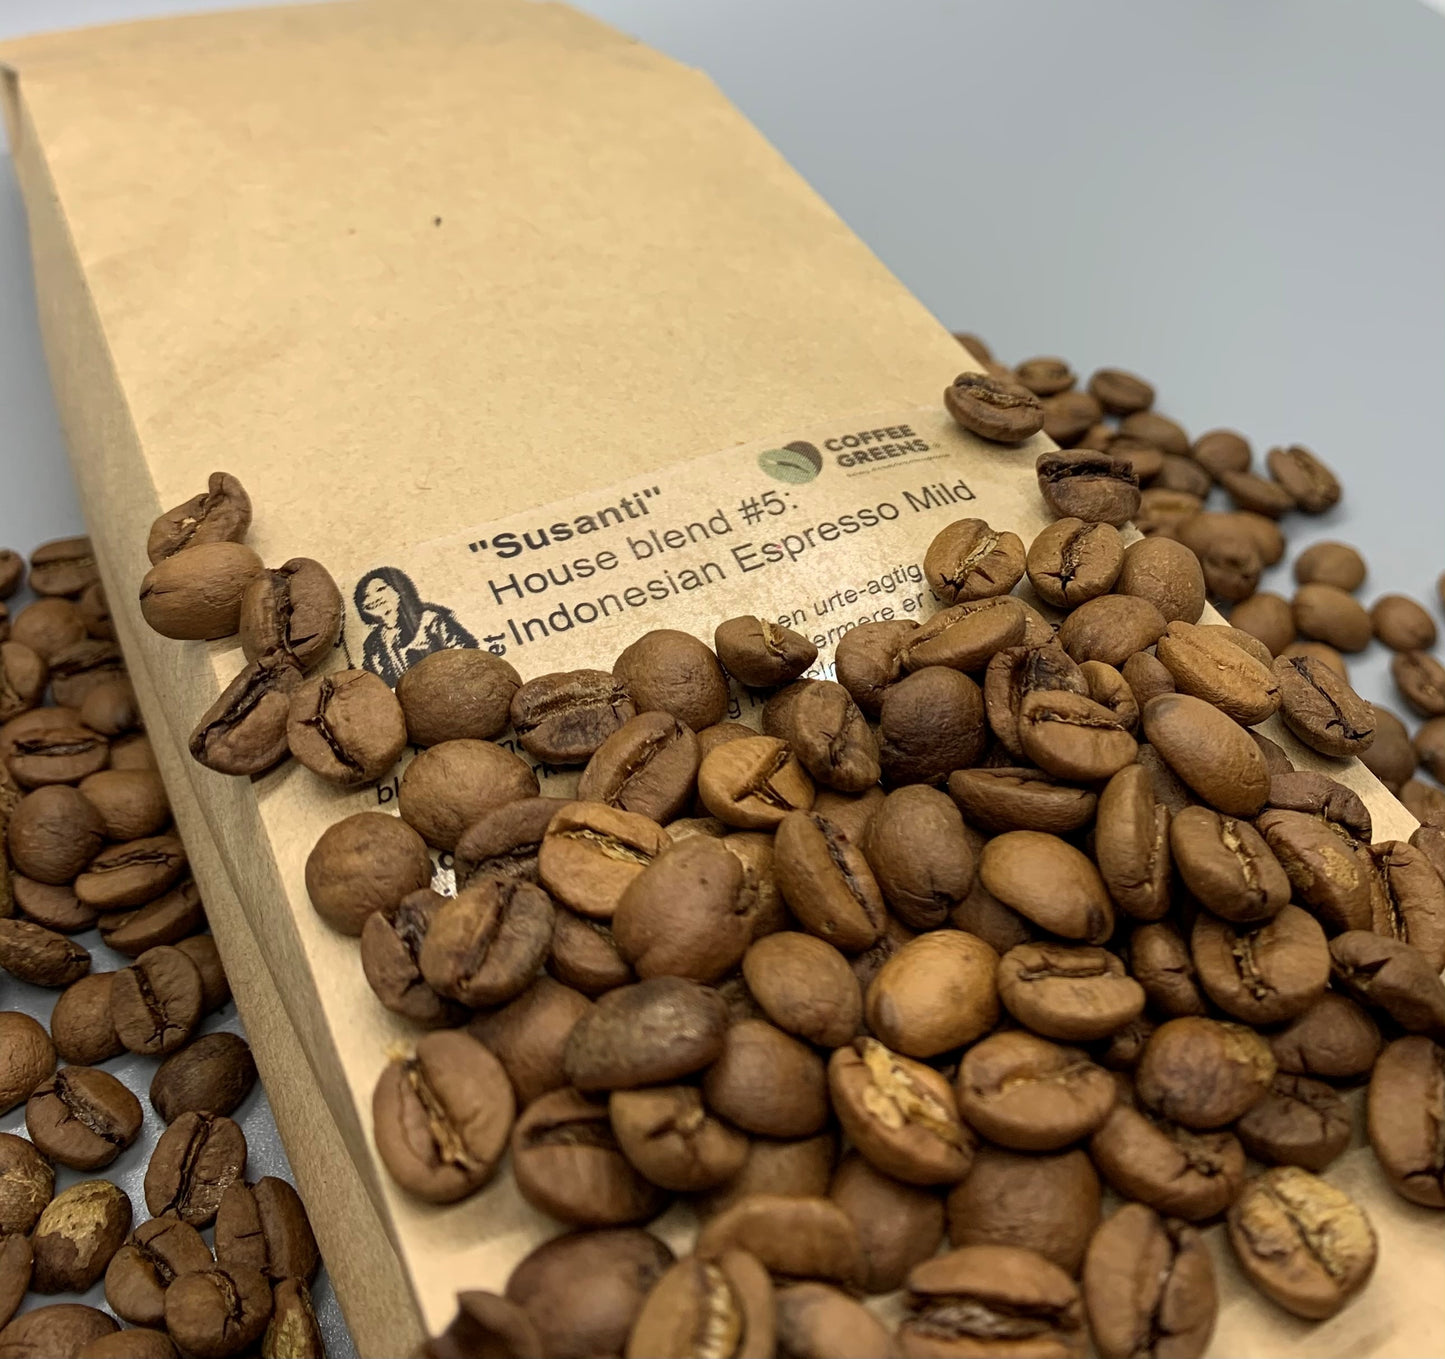 "Susanti"- House blend # 5:Indonesian Espresso Mild - Roasted coffee beans